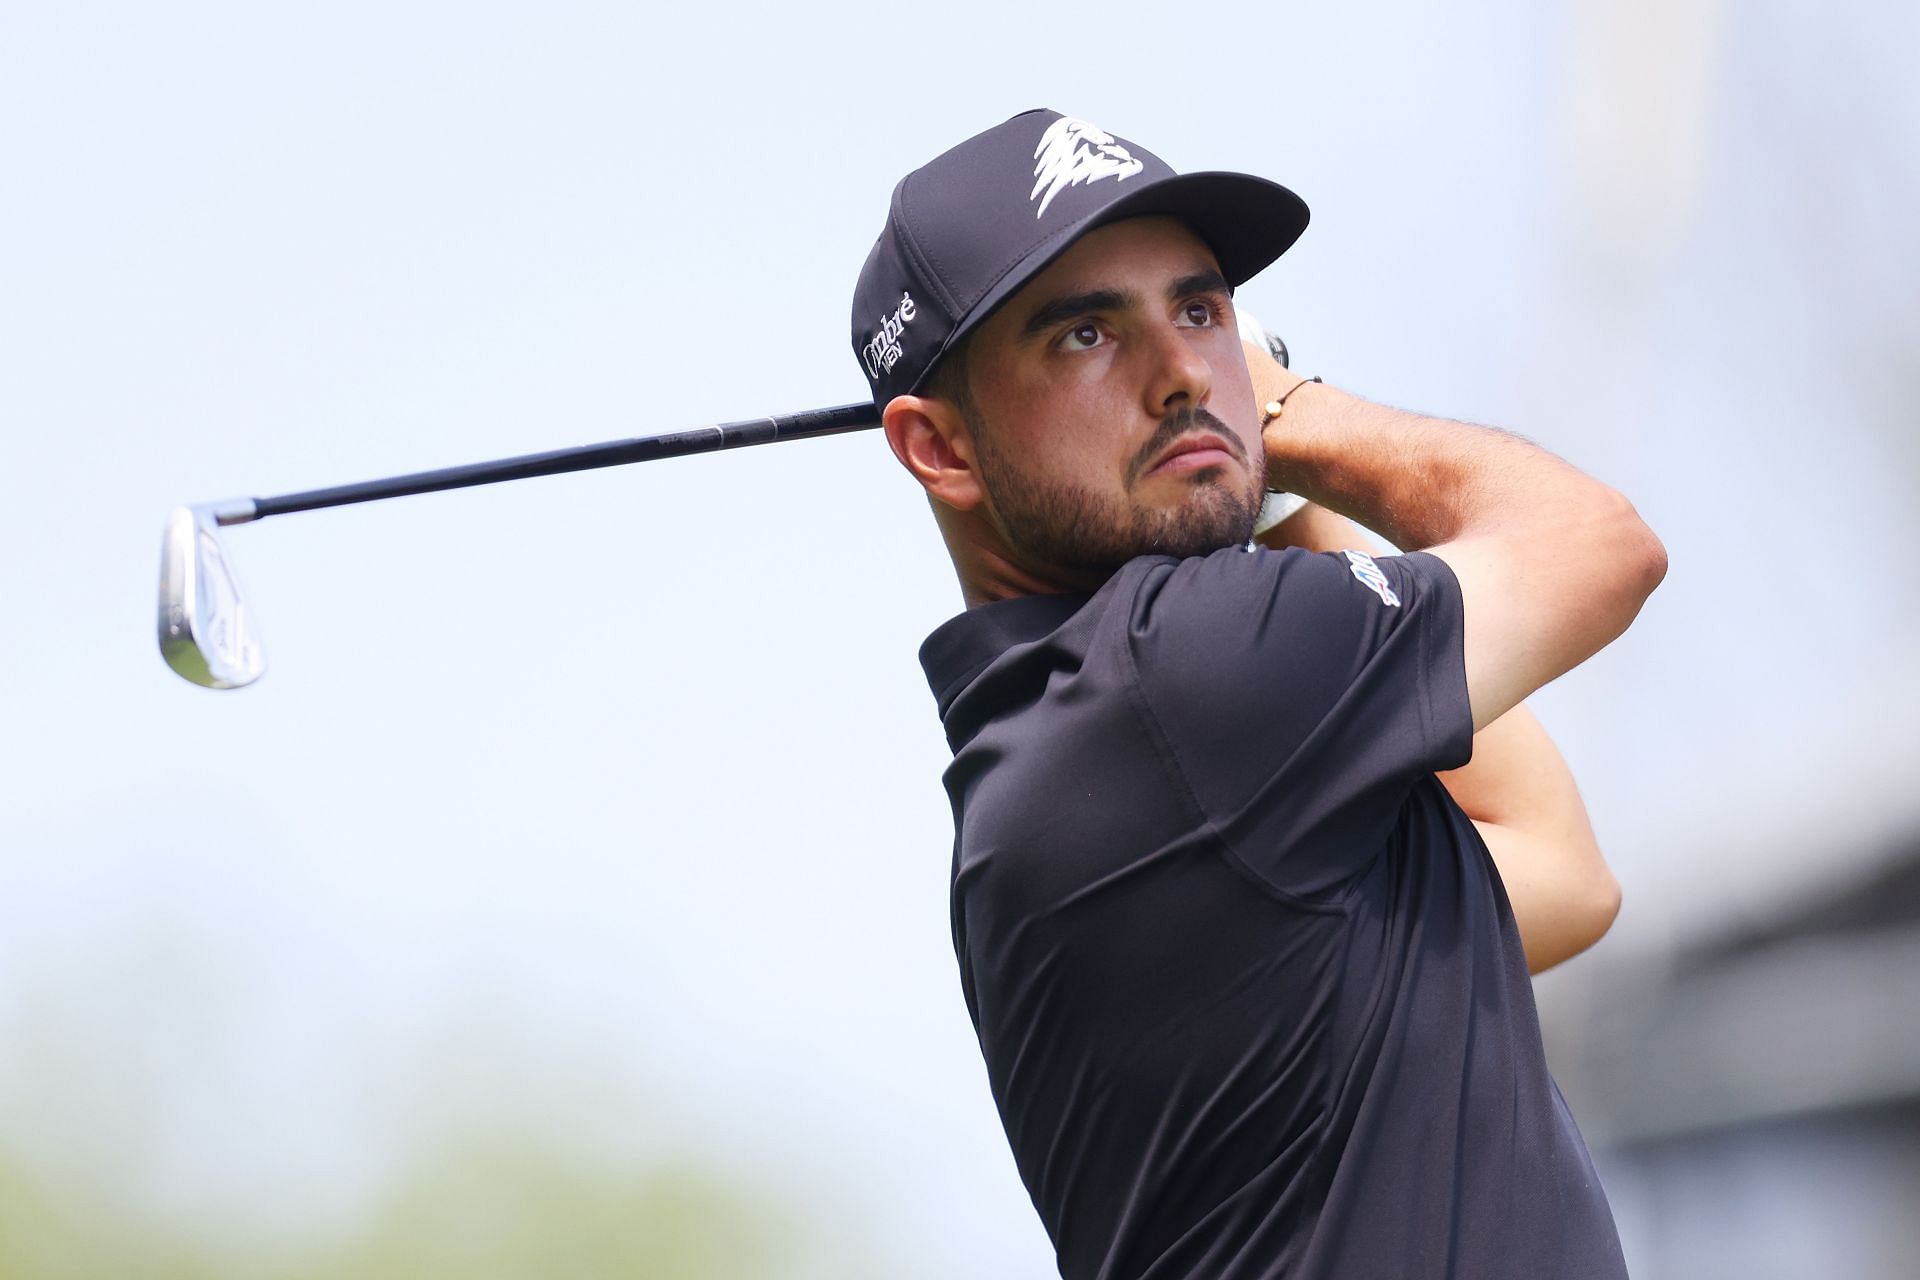 Abraham Ancer is placed joint third after two rounds at LIV Golf Chicago